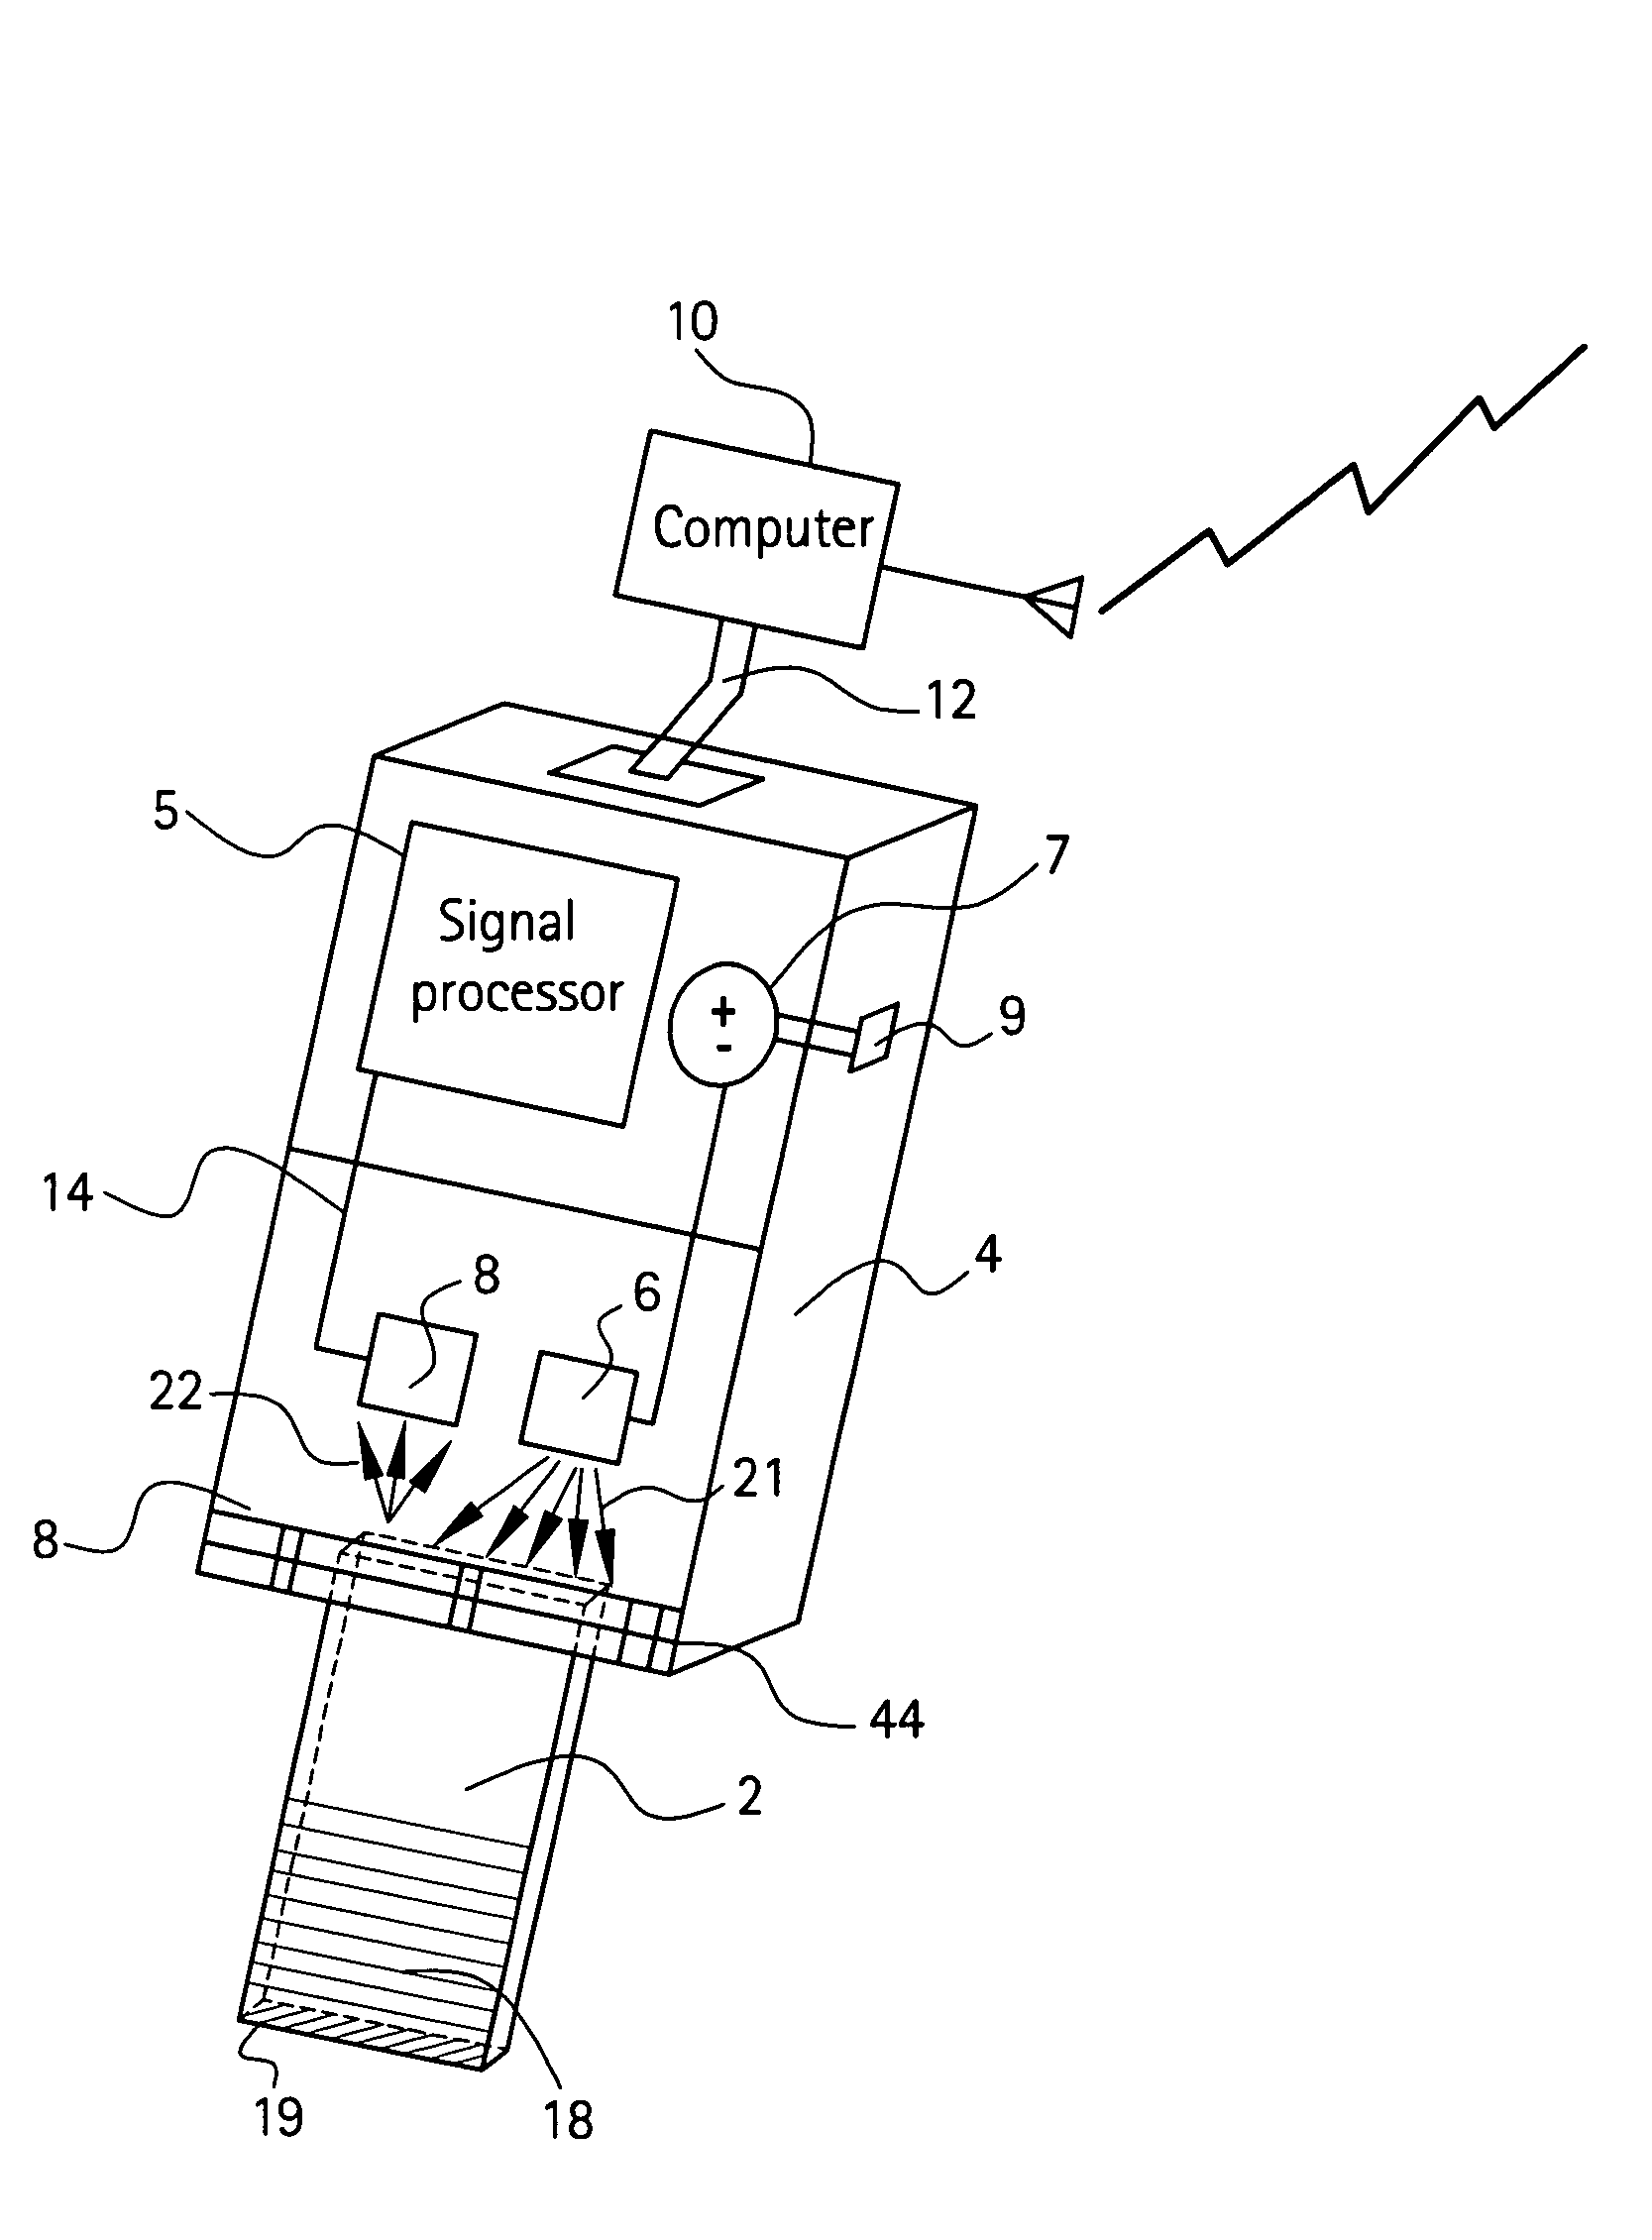 Handheld device with a disposable element for chemical analysis of multiple analytes